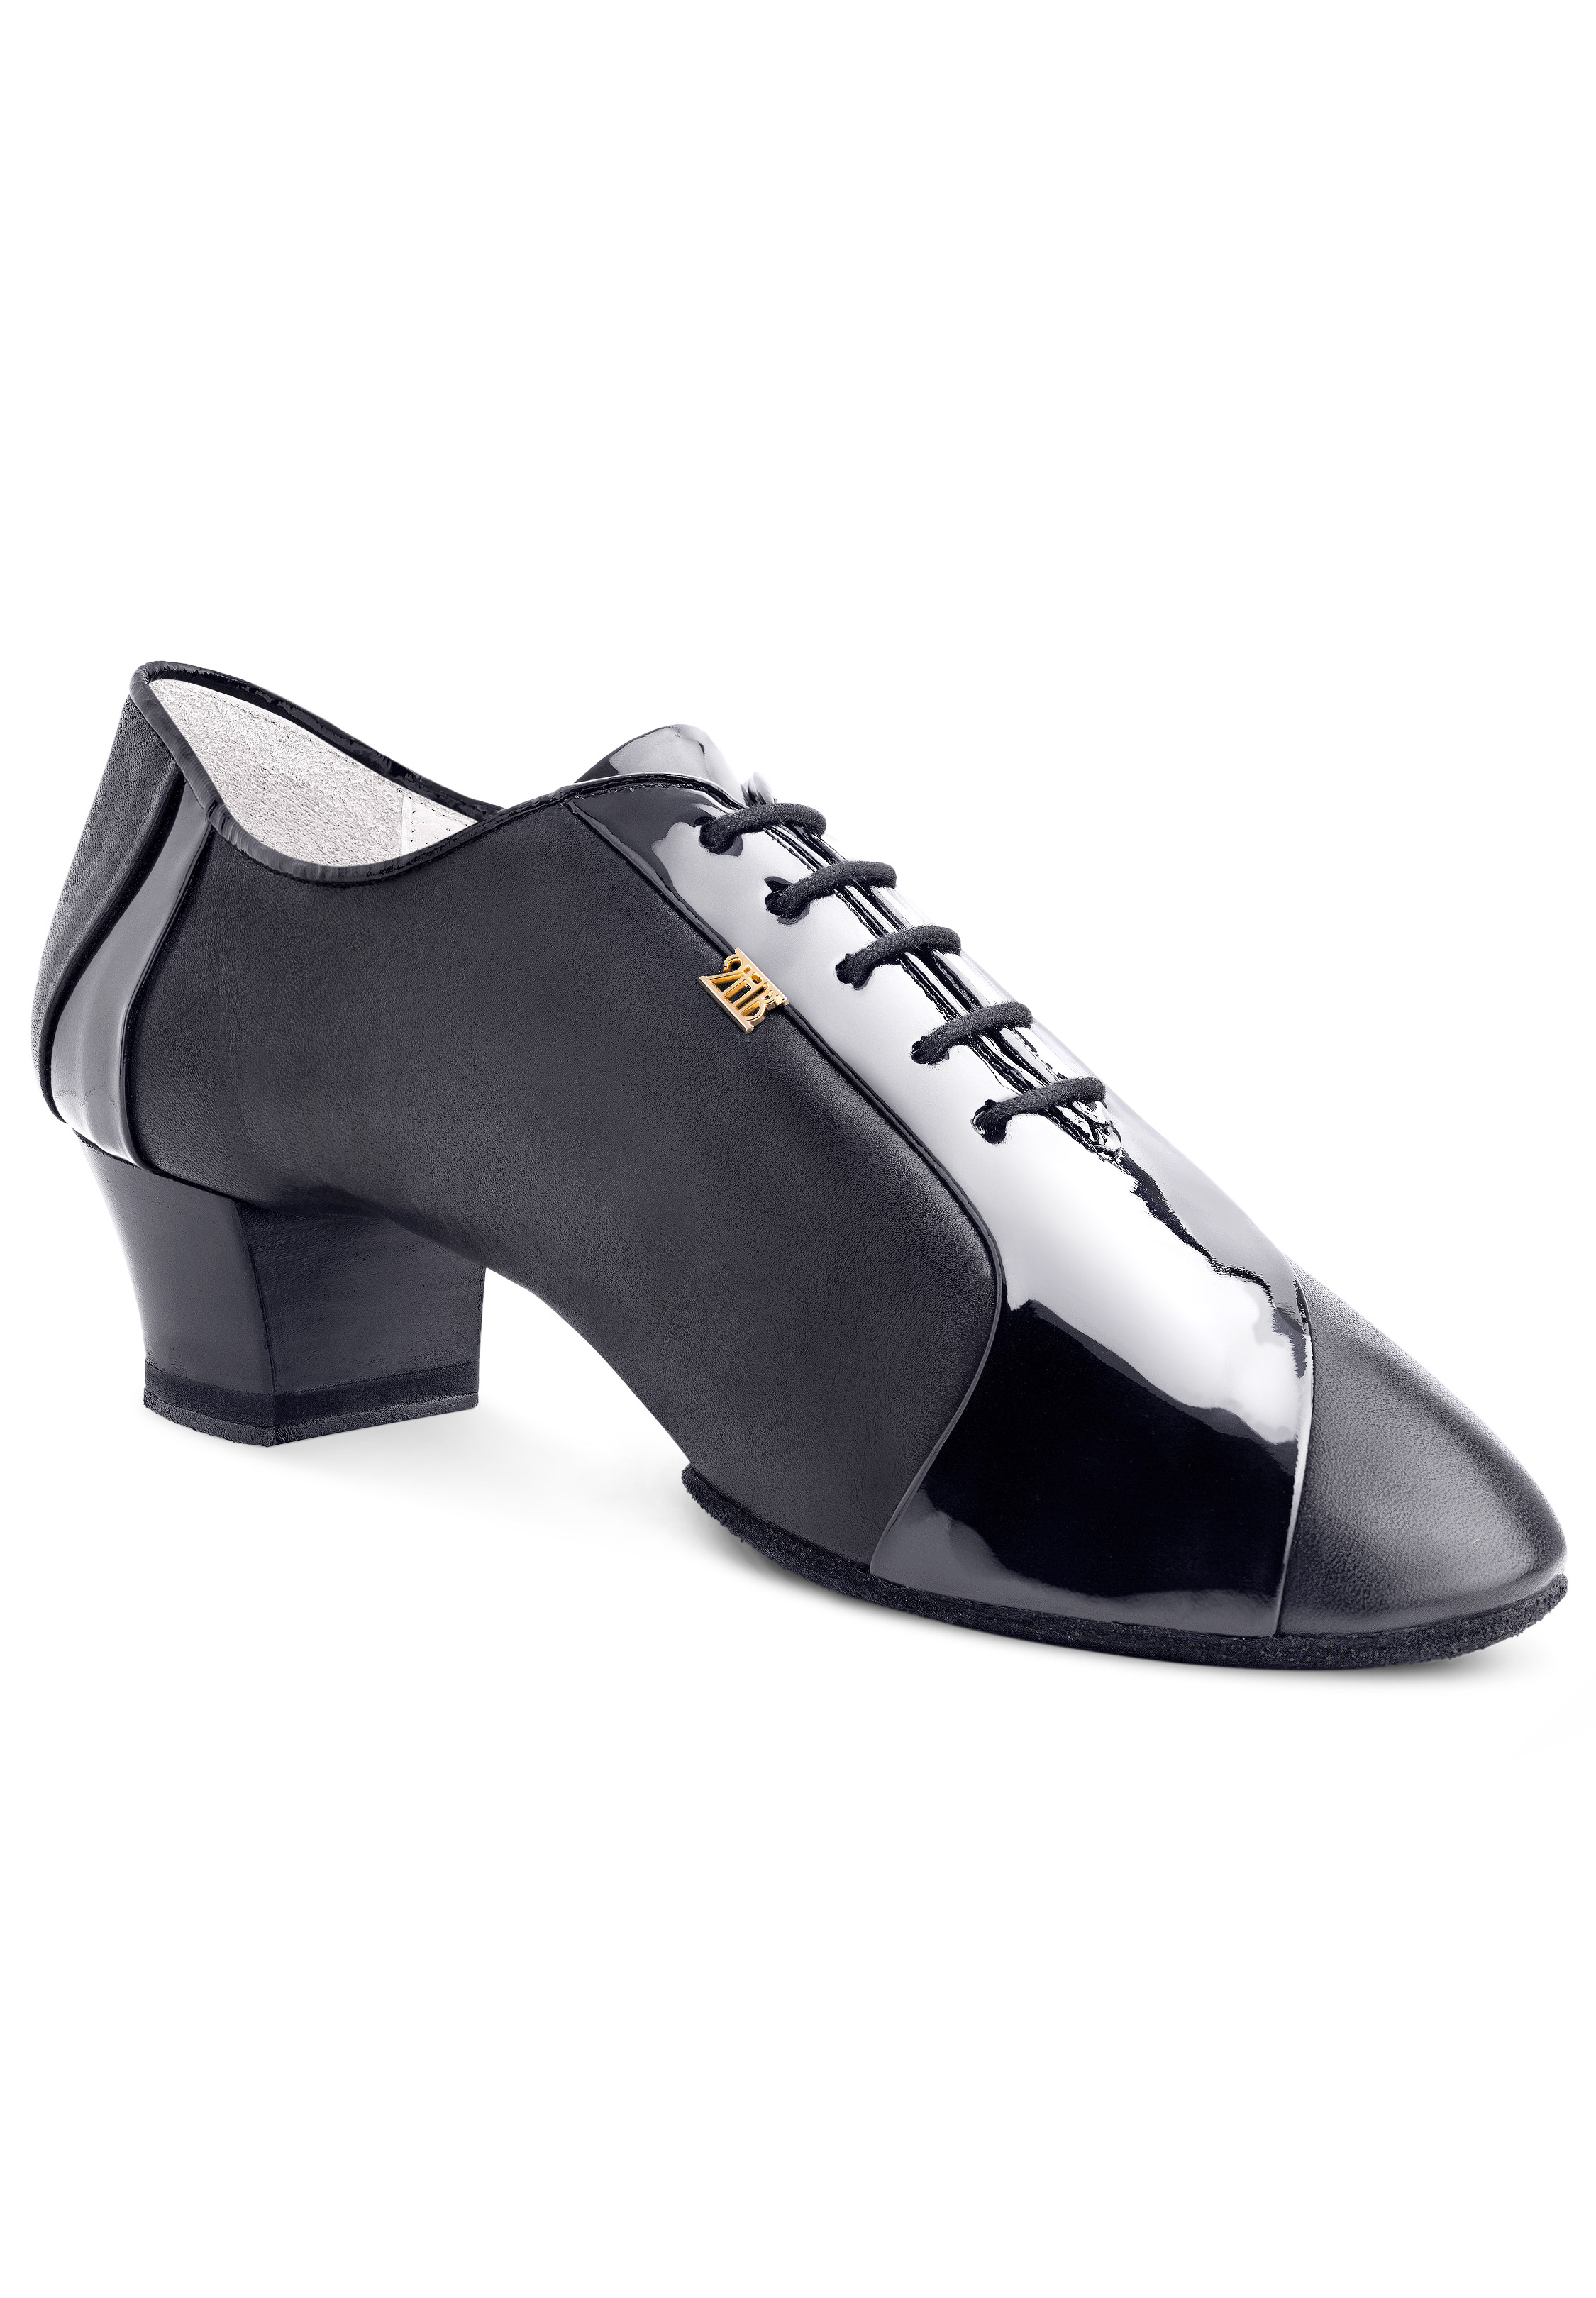 2HB Mens Latin Competition Shoes 5603SF | Latin Dance Shoes